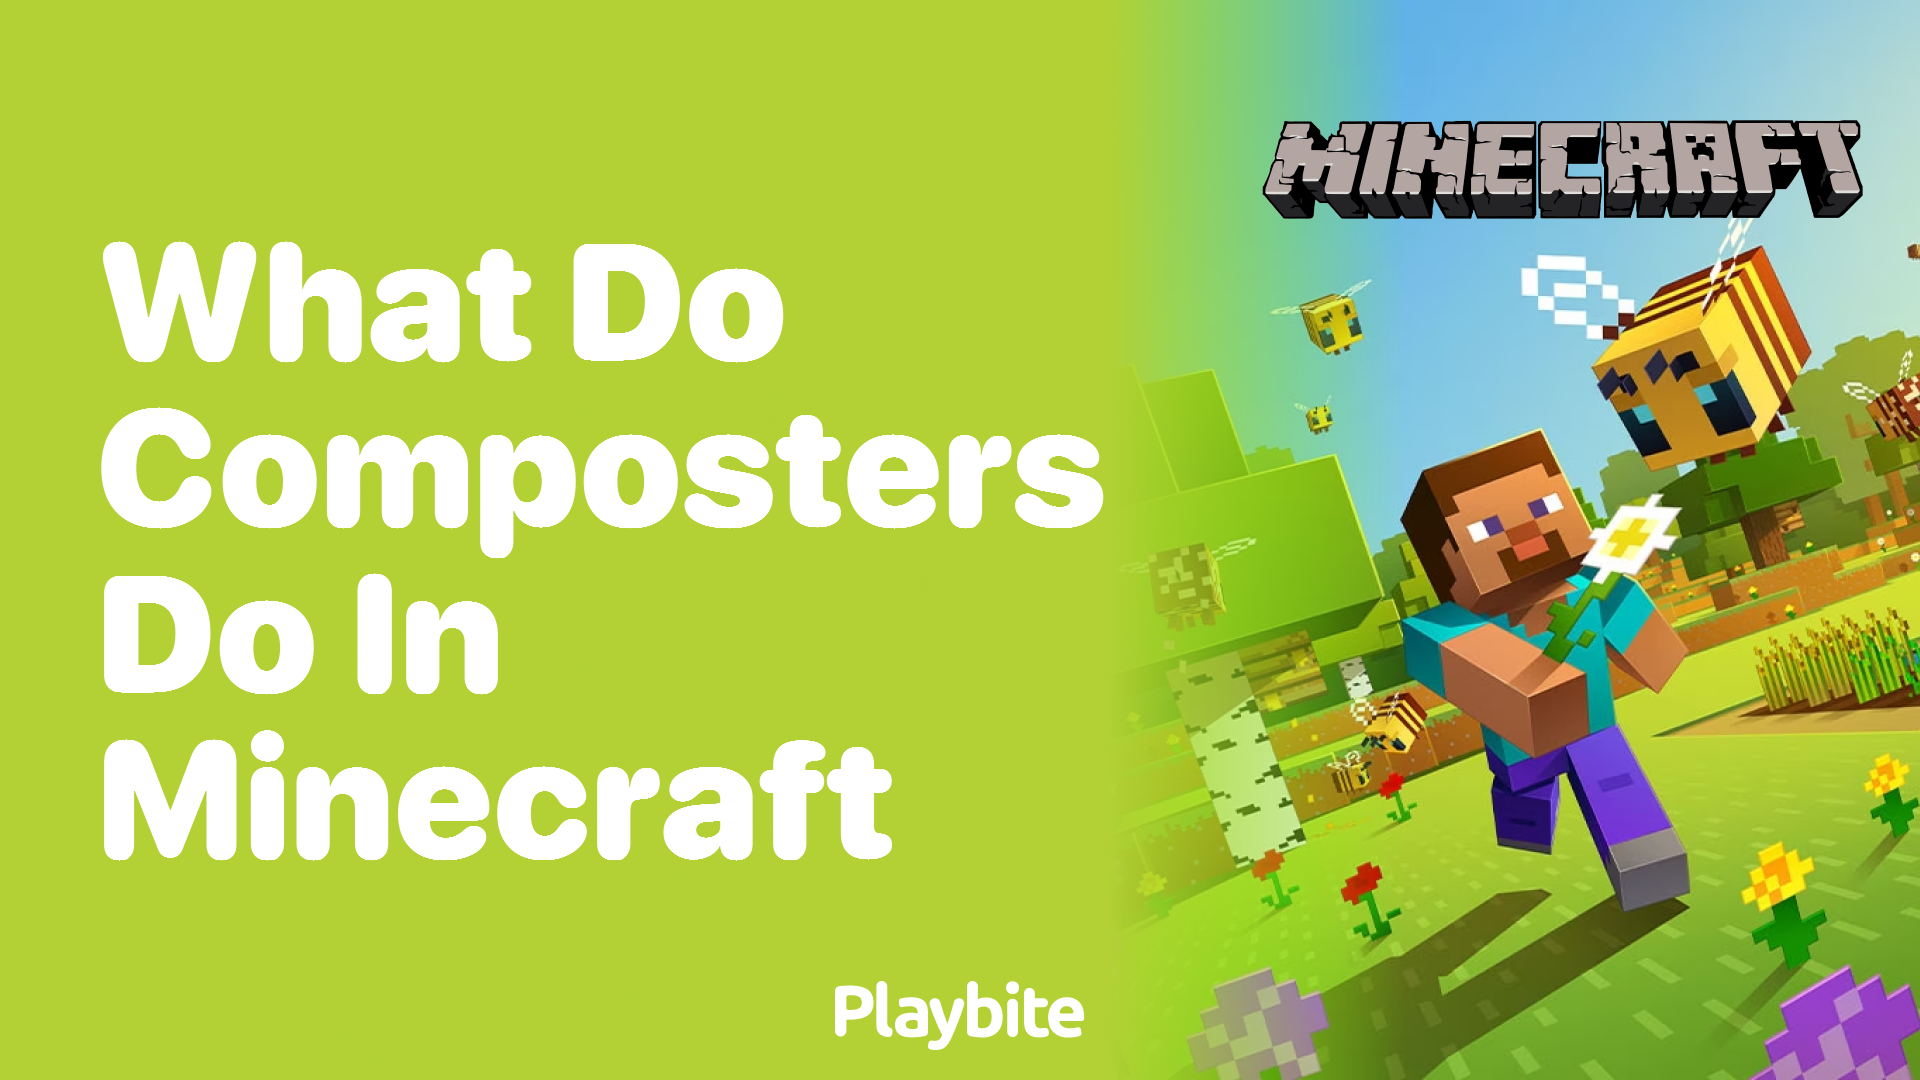 What Do Composters Do in Minecraft?